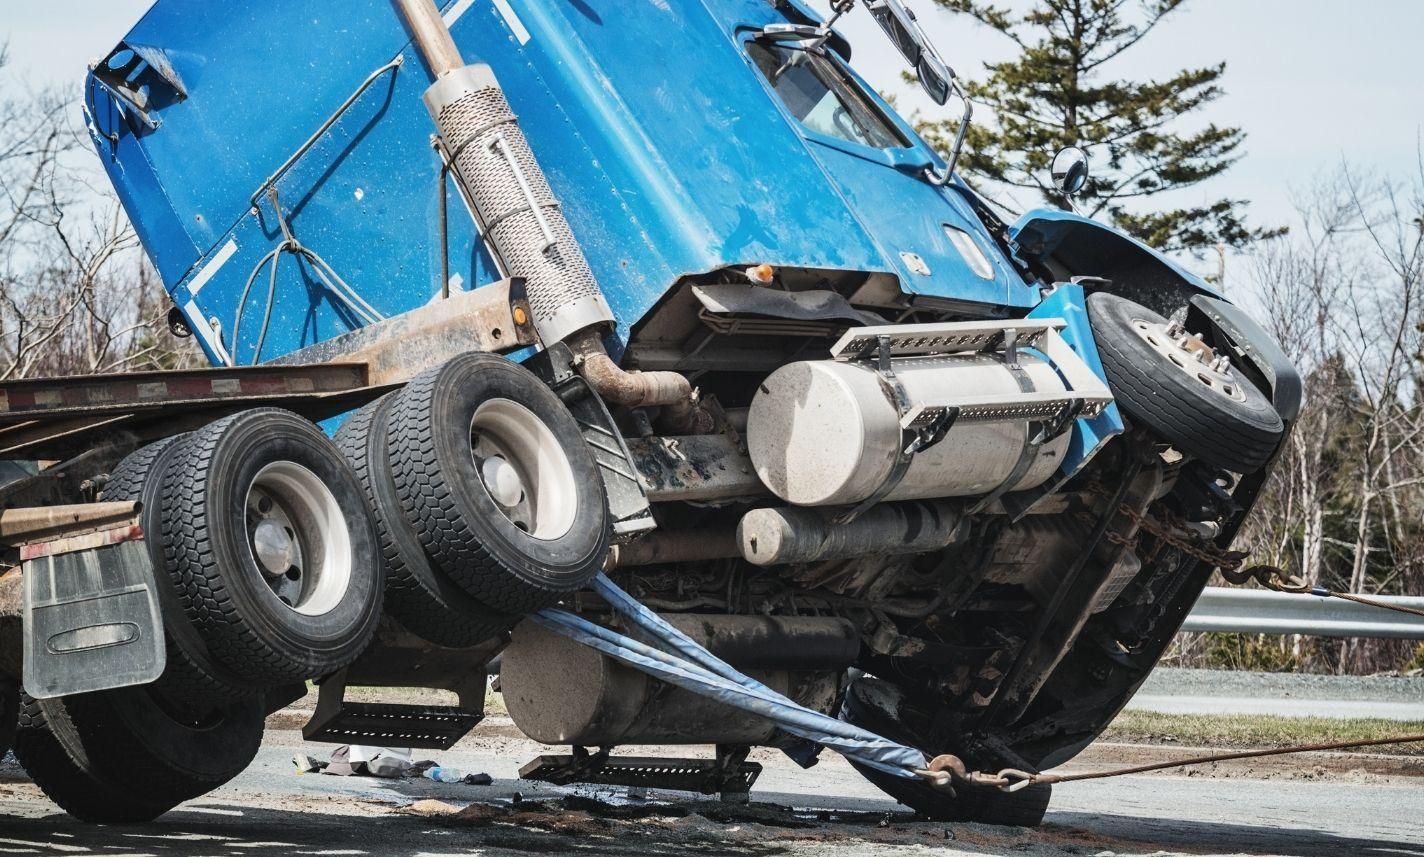 manassas-commercial-truck-accident-injury-lawyer